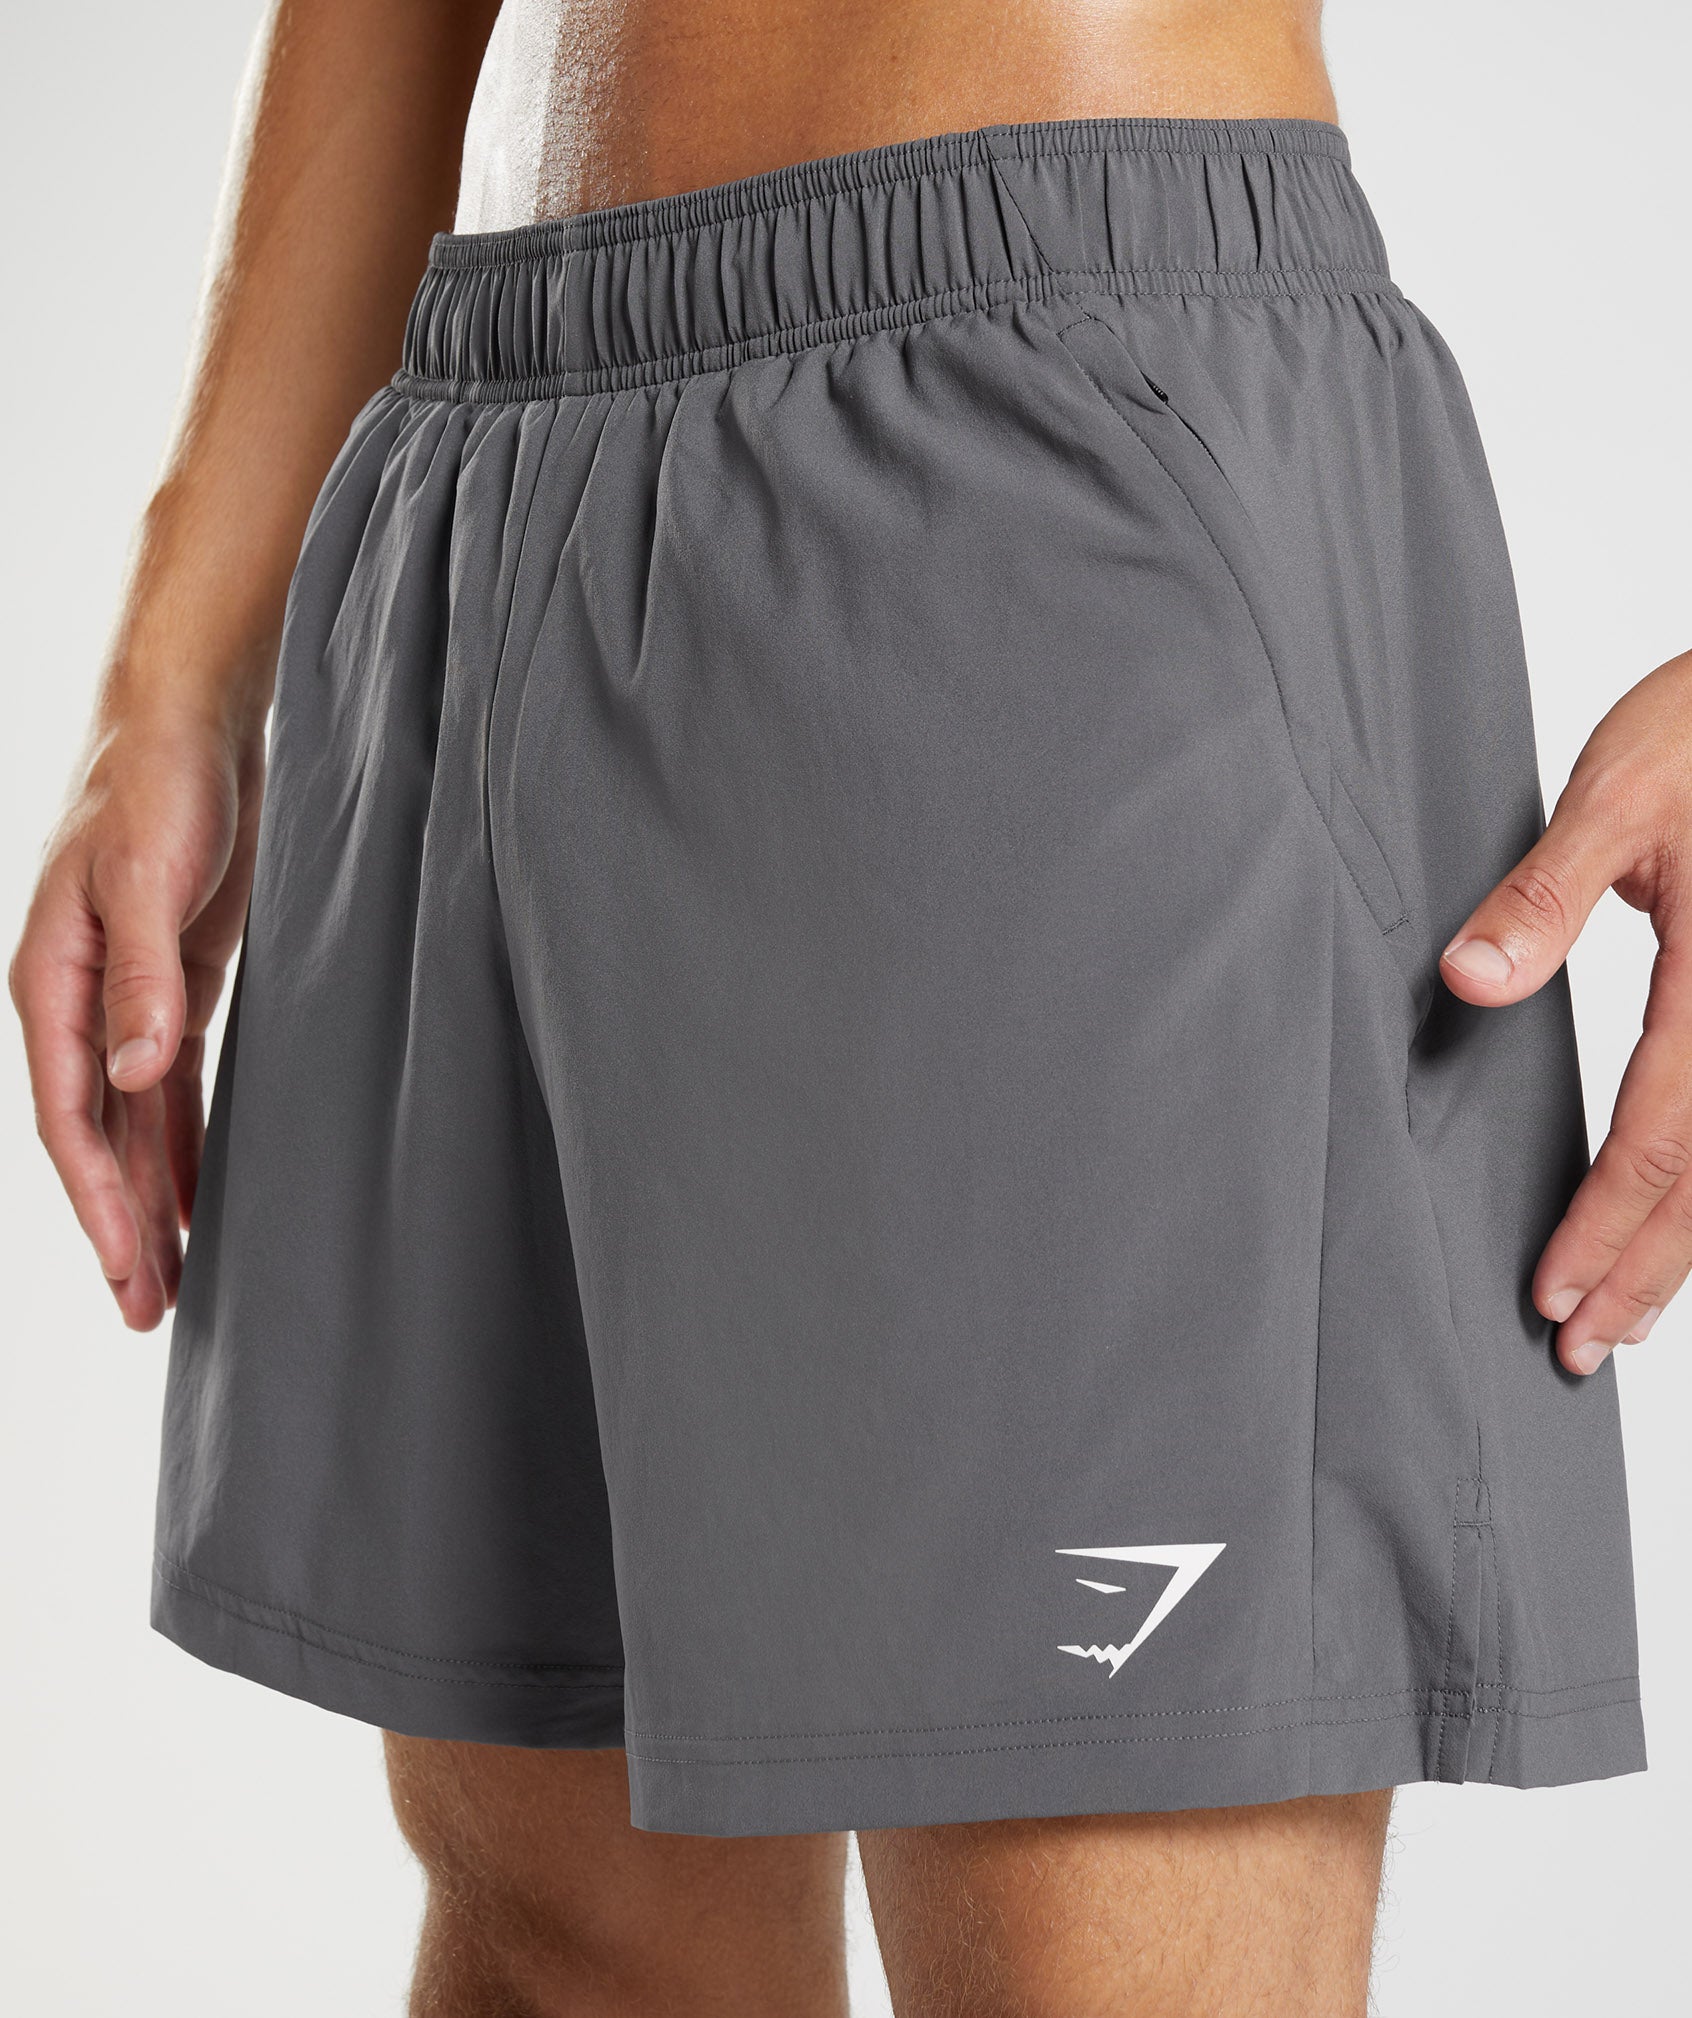 Sport 7" 2 In 1 Shorts in Silhouette Grey/Black - view 6